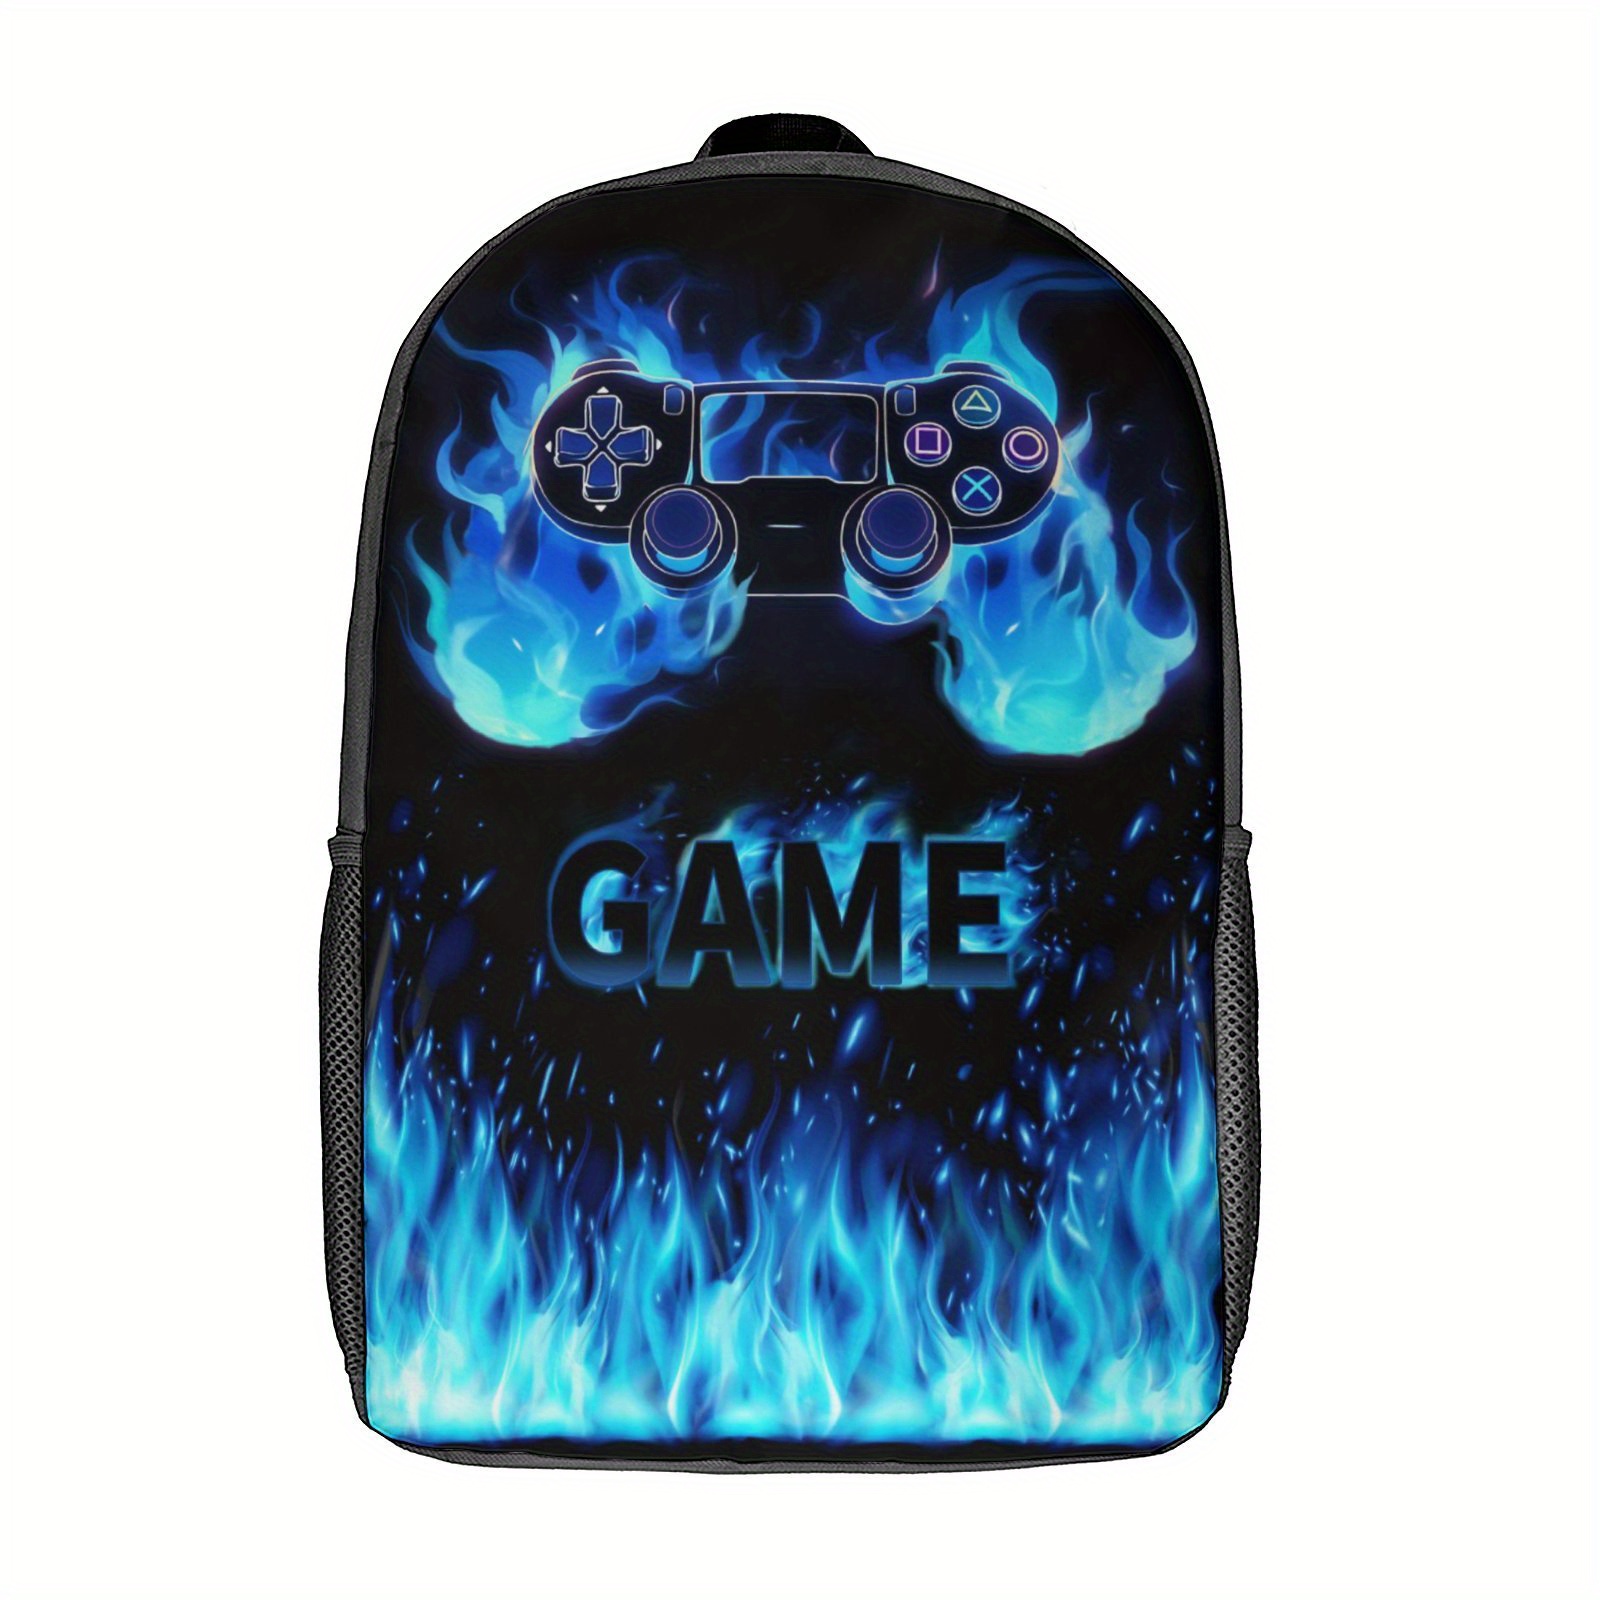 

Game Controller With Blue Flames Print Campus Backpack For Student, Trendy Casual Schoolbag For Teens, Perfect For College & Hanging Out